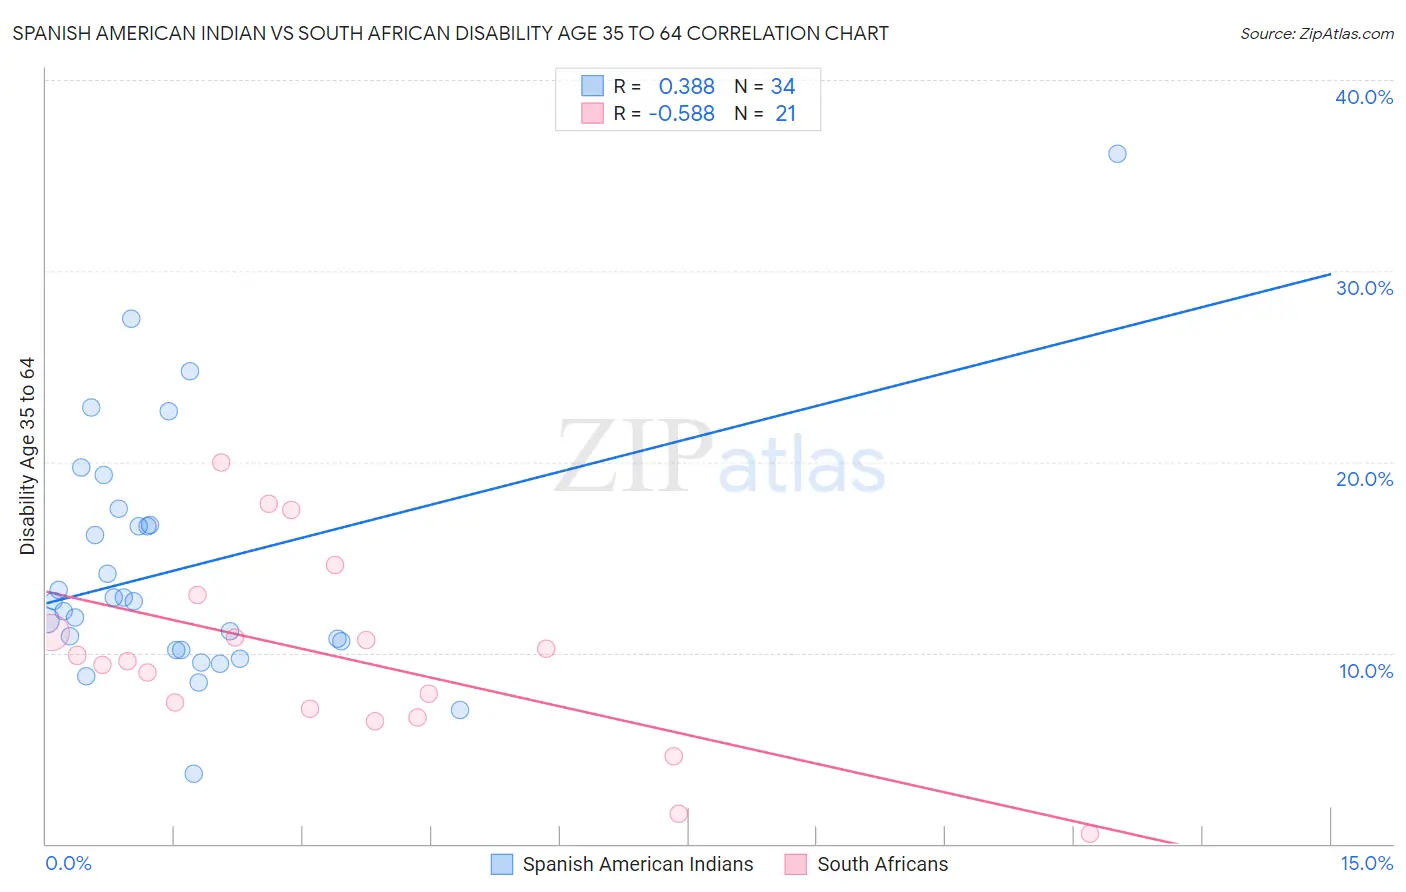 Spanish American Indian vs South African Disability Age 35 to 64